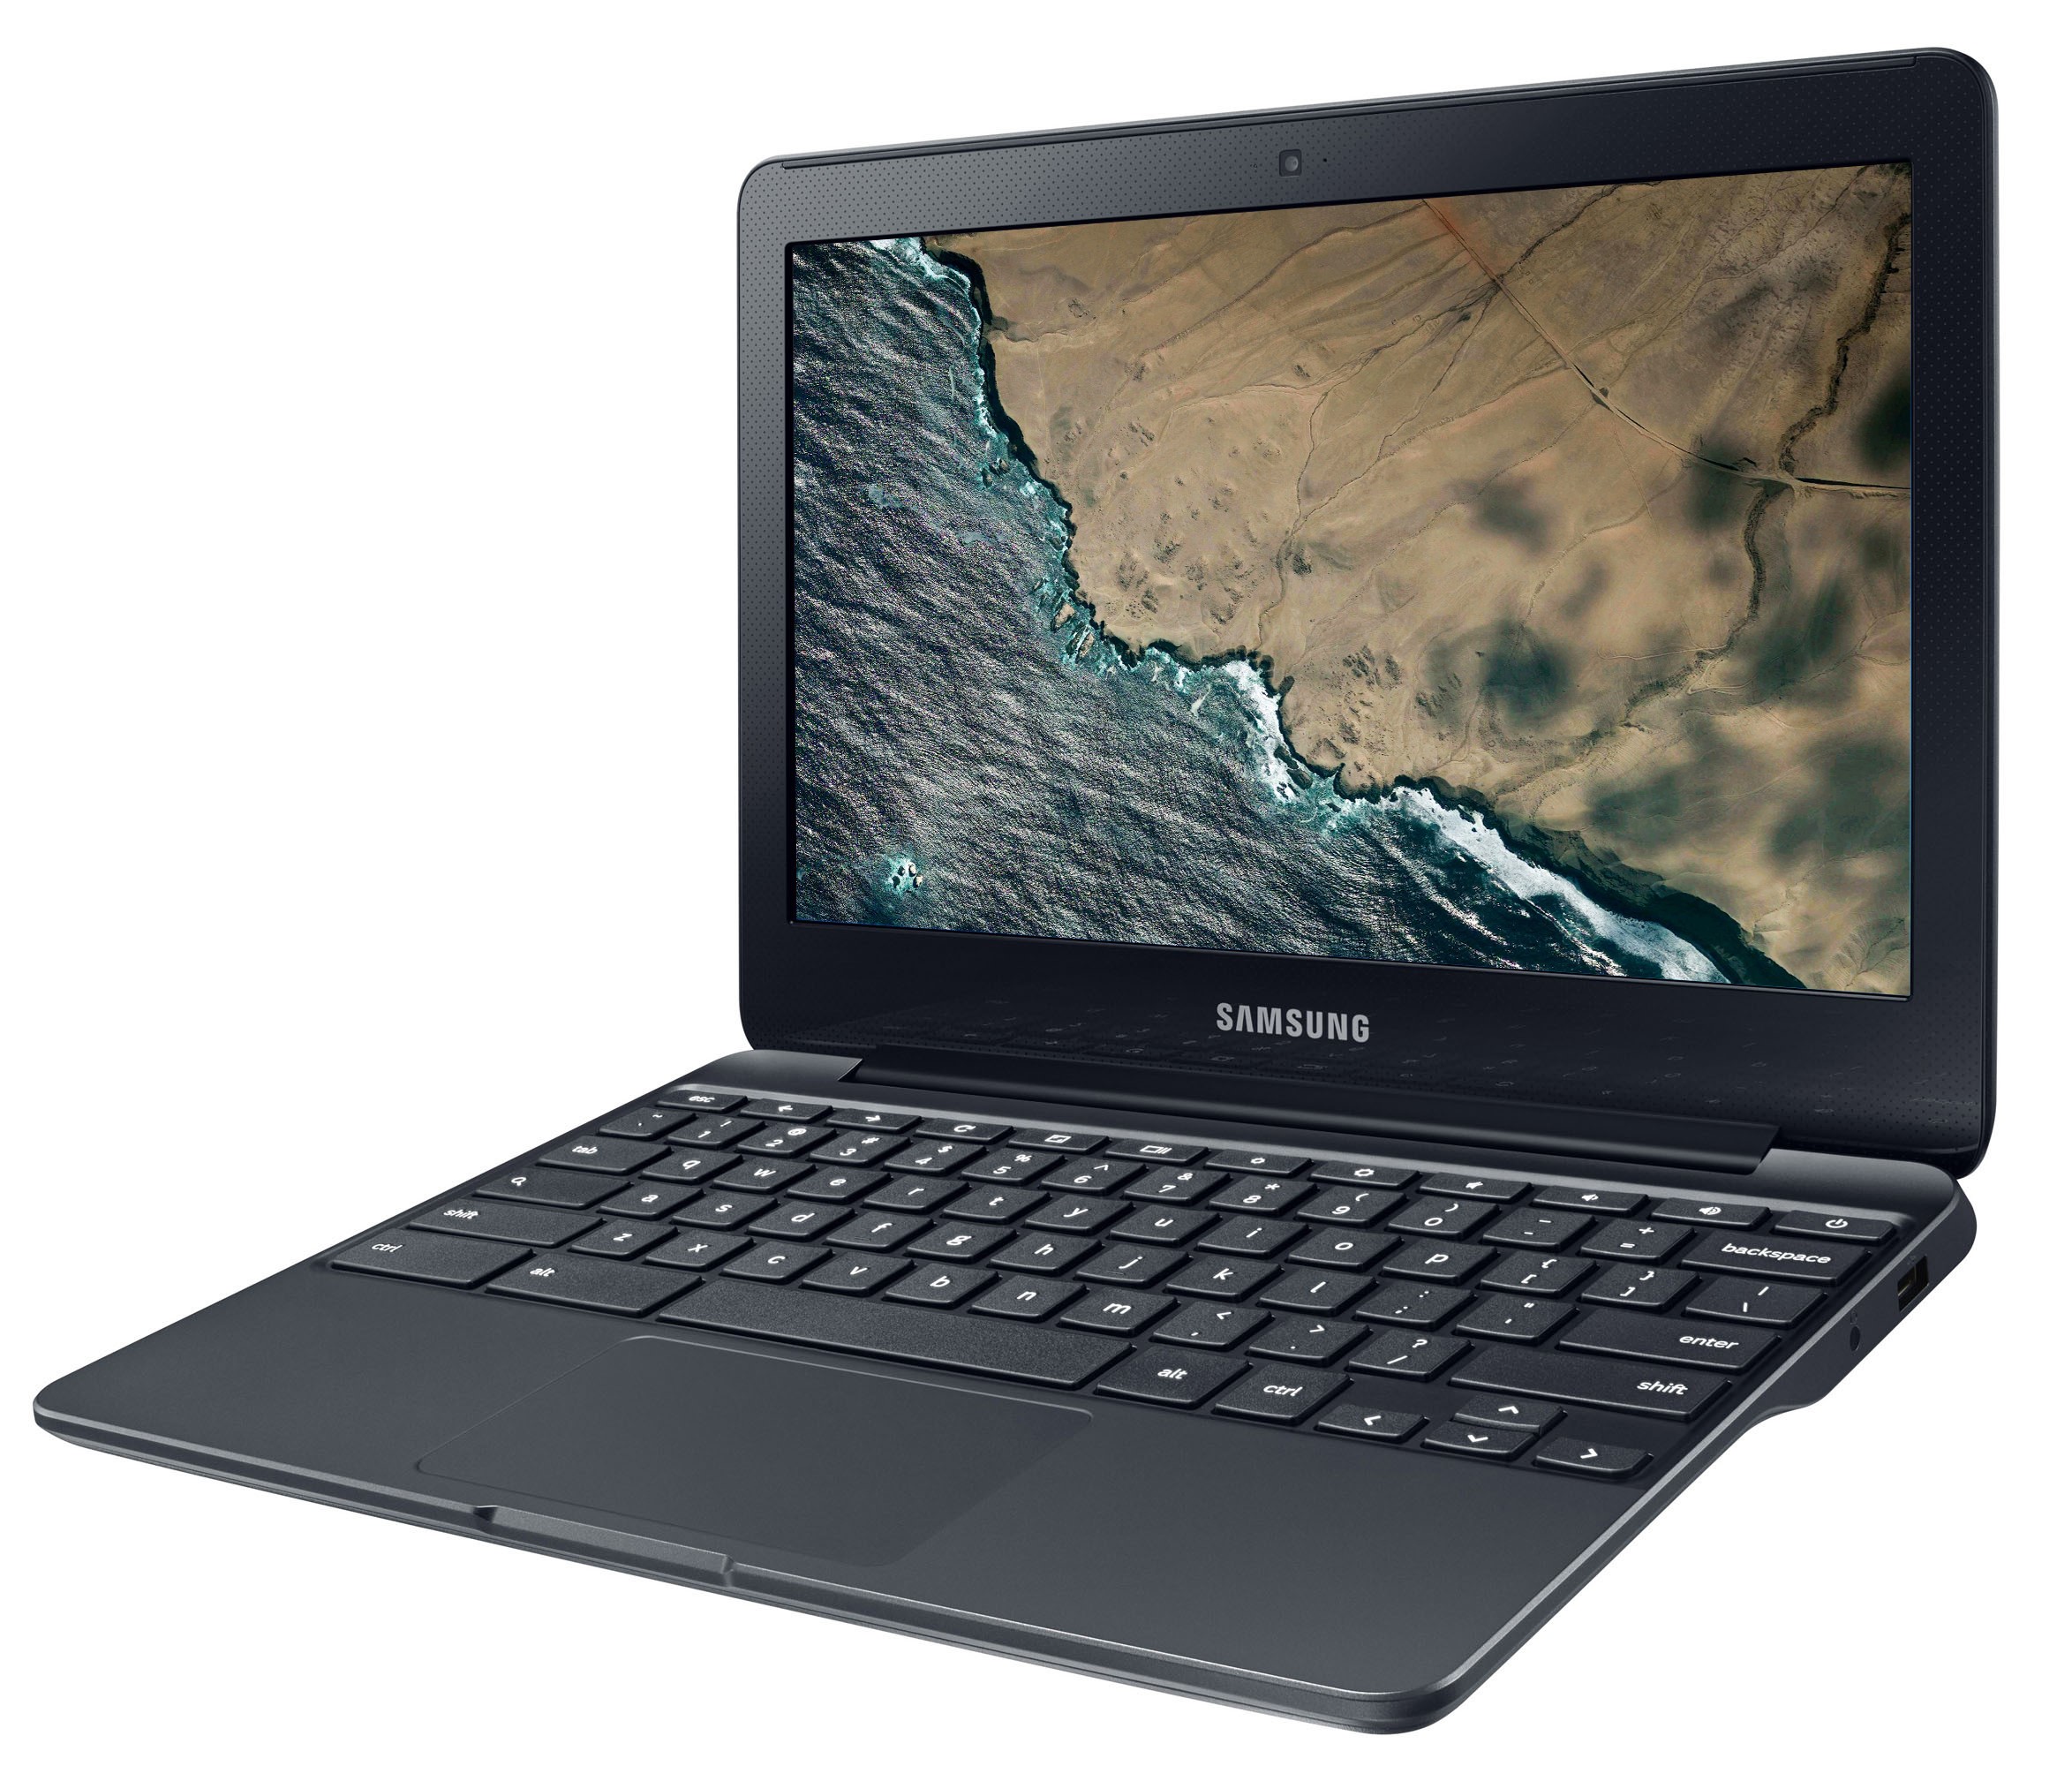 Image of the Samsung Chromebook 3